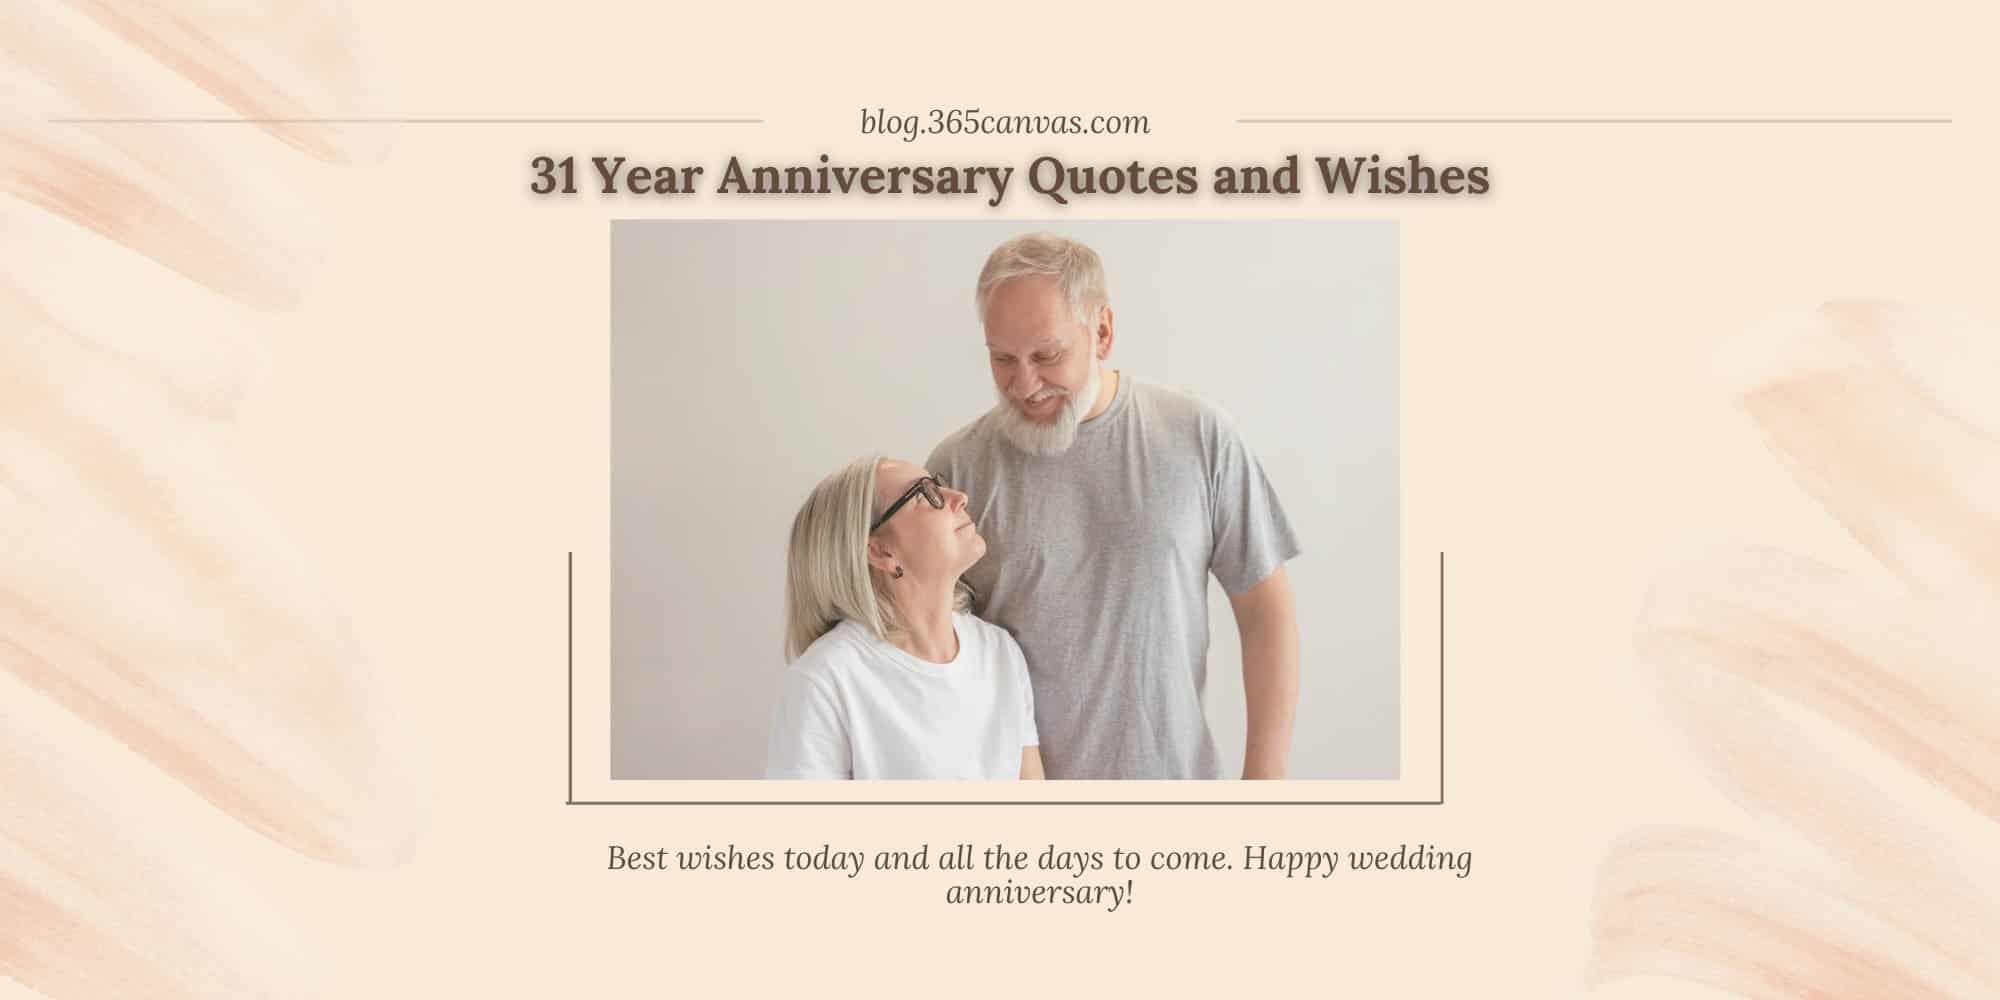 50+ Happy 31st Year Travel Wedding Anniversary Quotes, Wishes, Messages